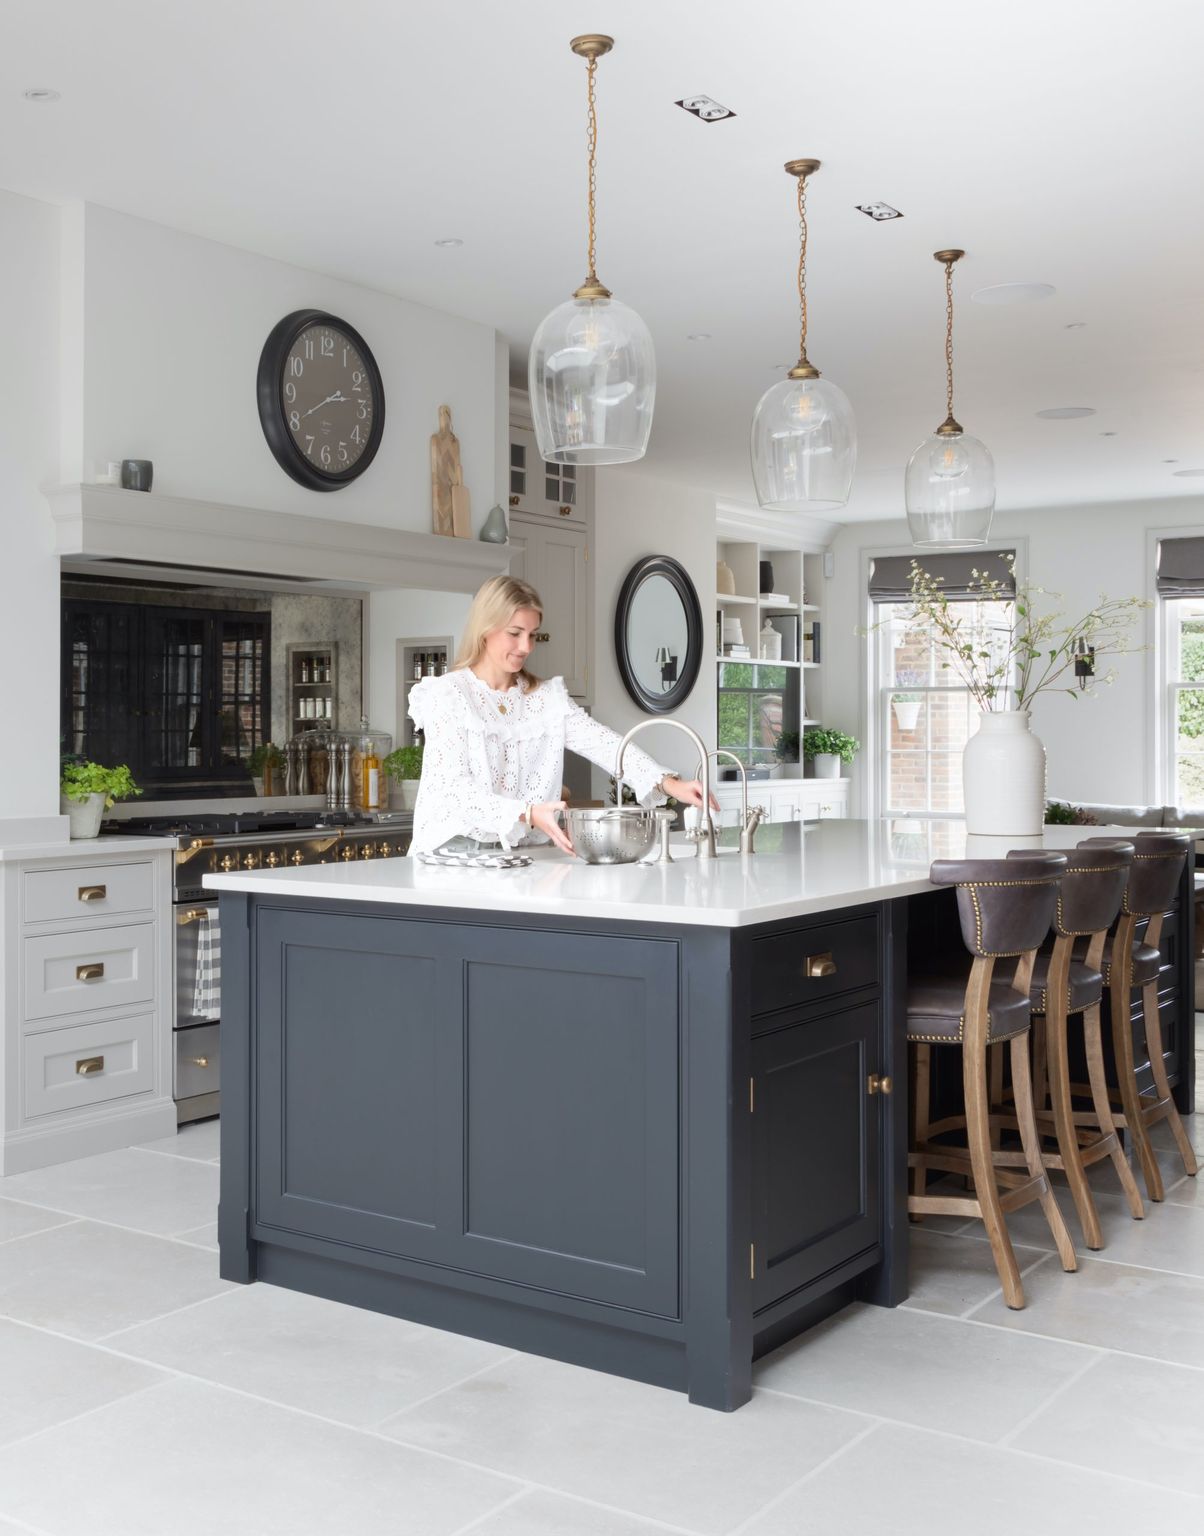 Brampton Limestone | At Home with Holly Donoghue